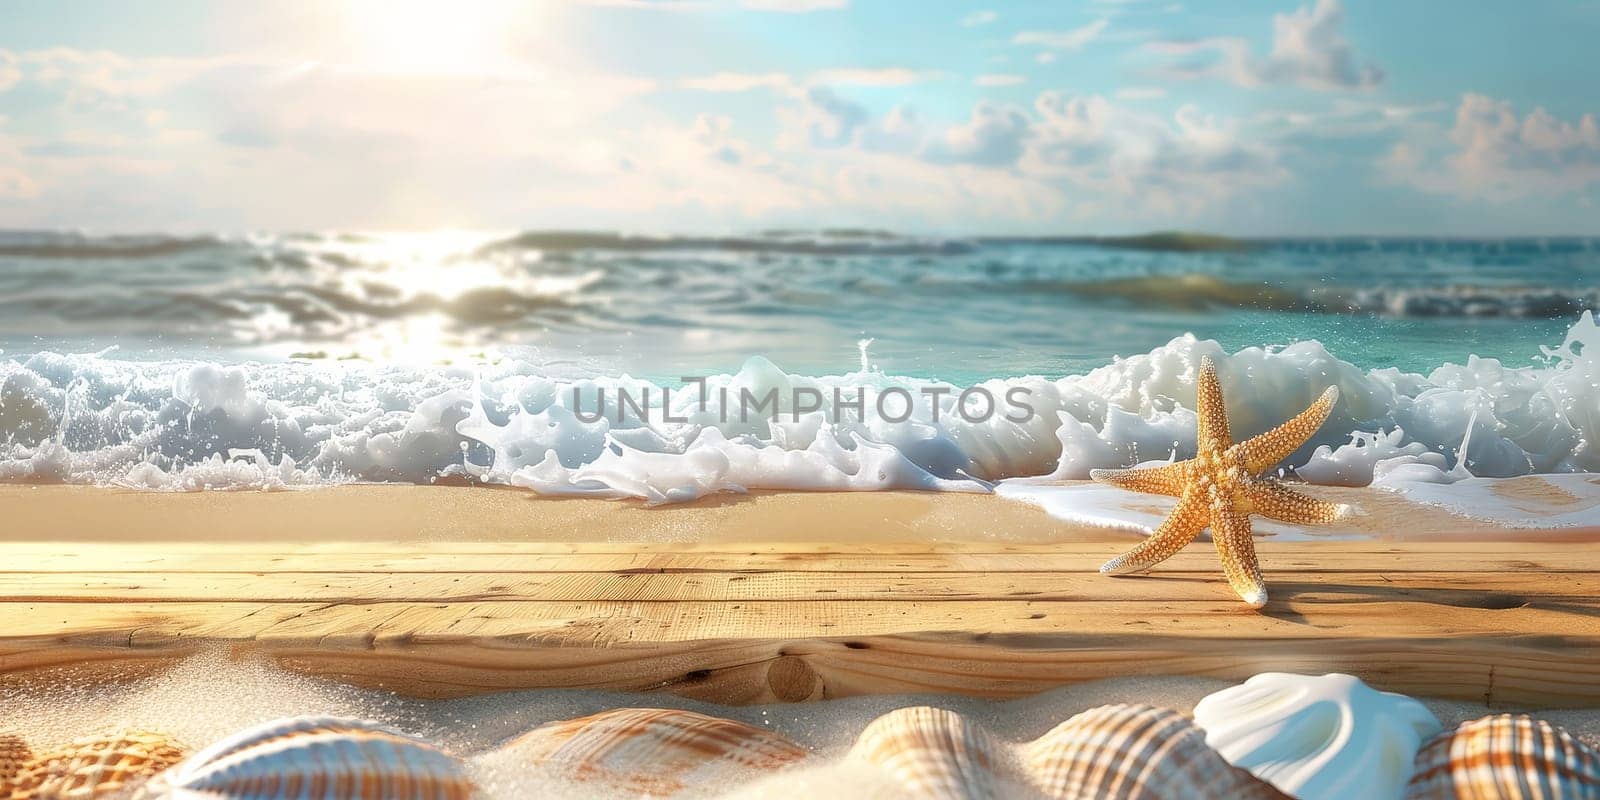 A starfish is on a beach next to the ocean. The starfish is the main focus of the image, and it is a peaceful and serene scene